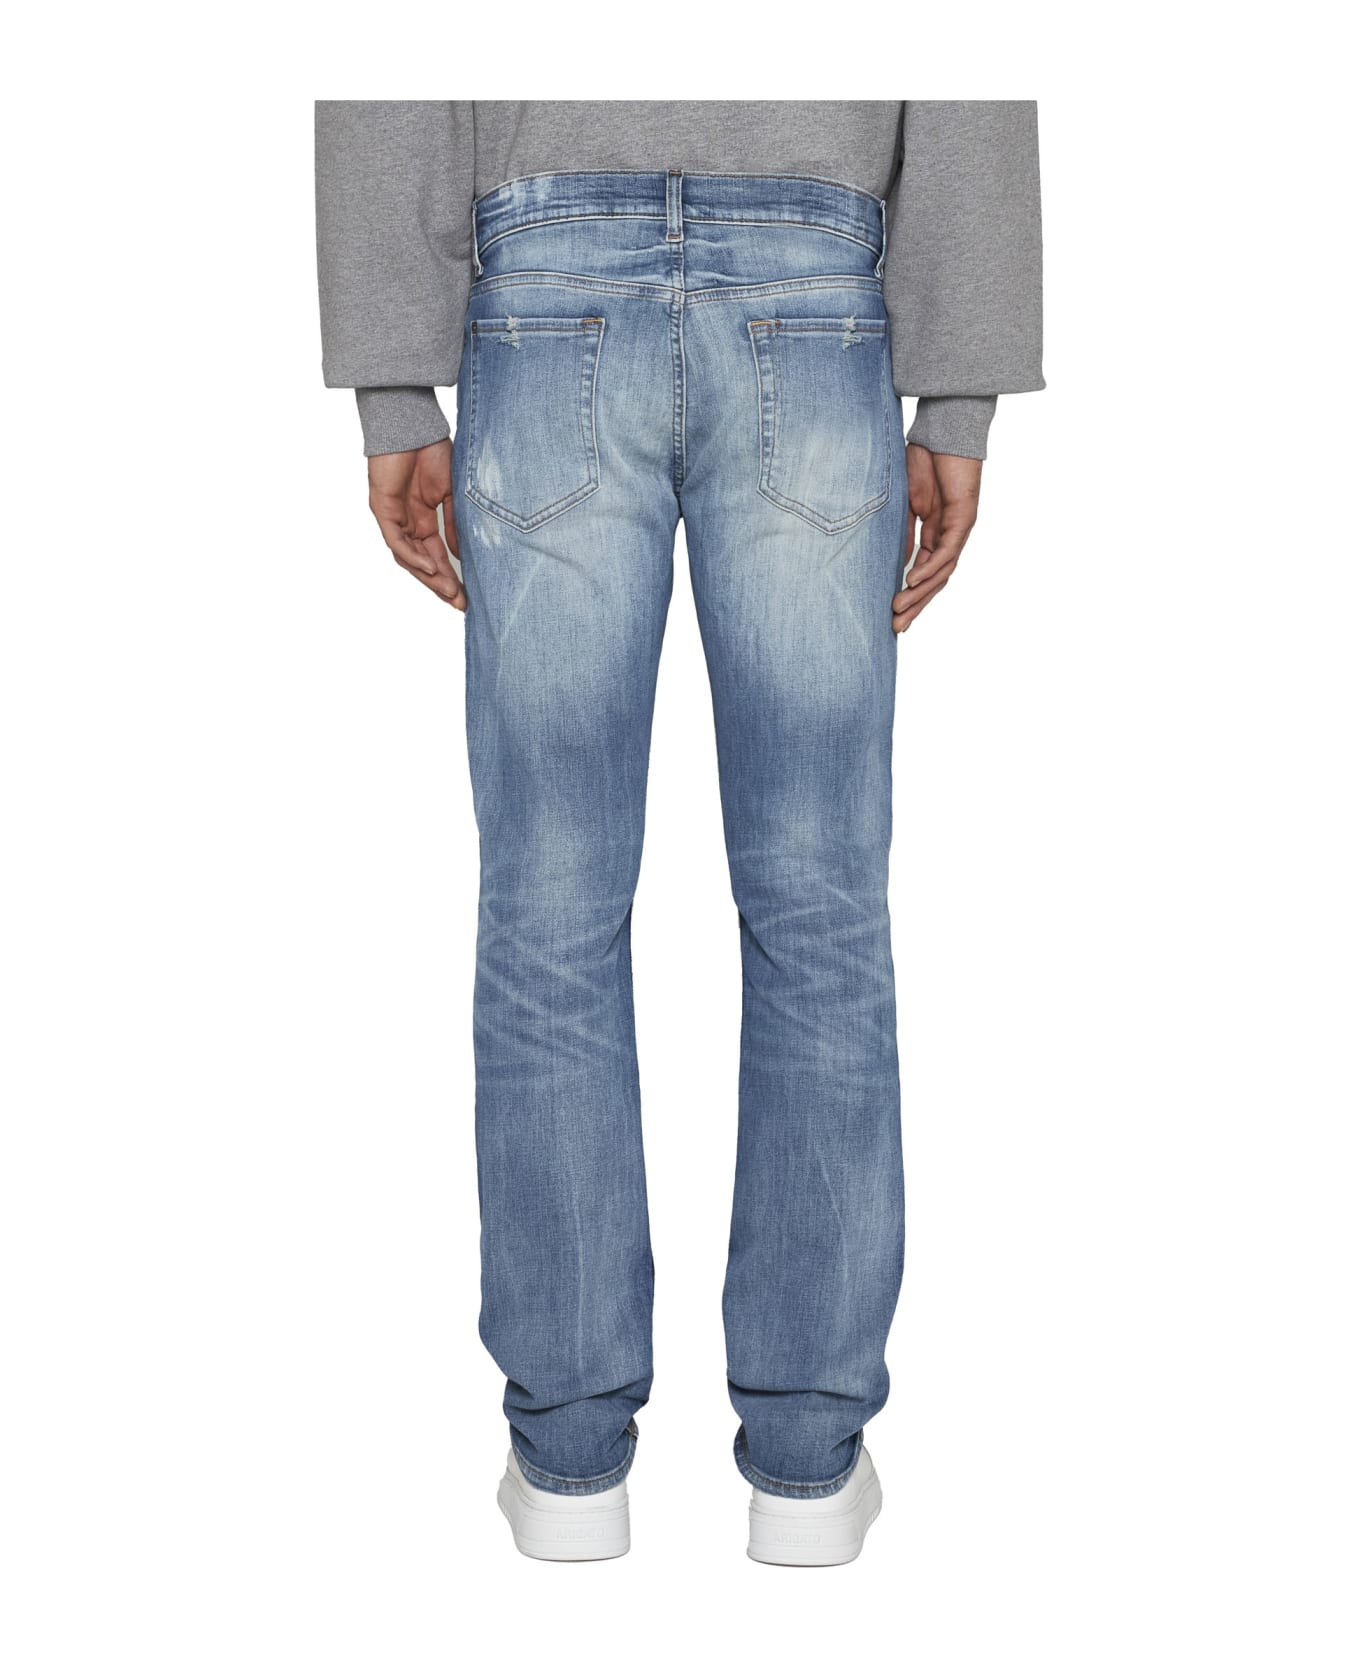 7 For All Mankind Jeans - Light blue デニム